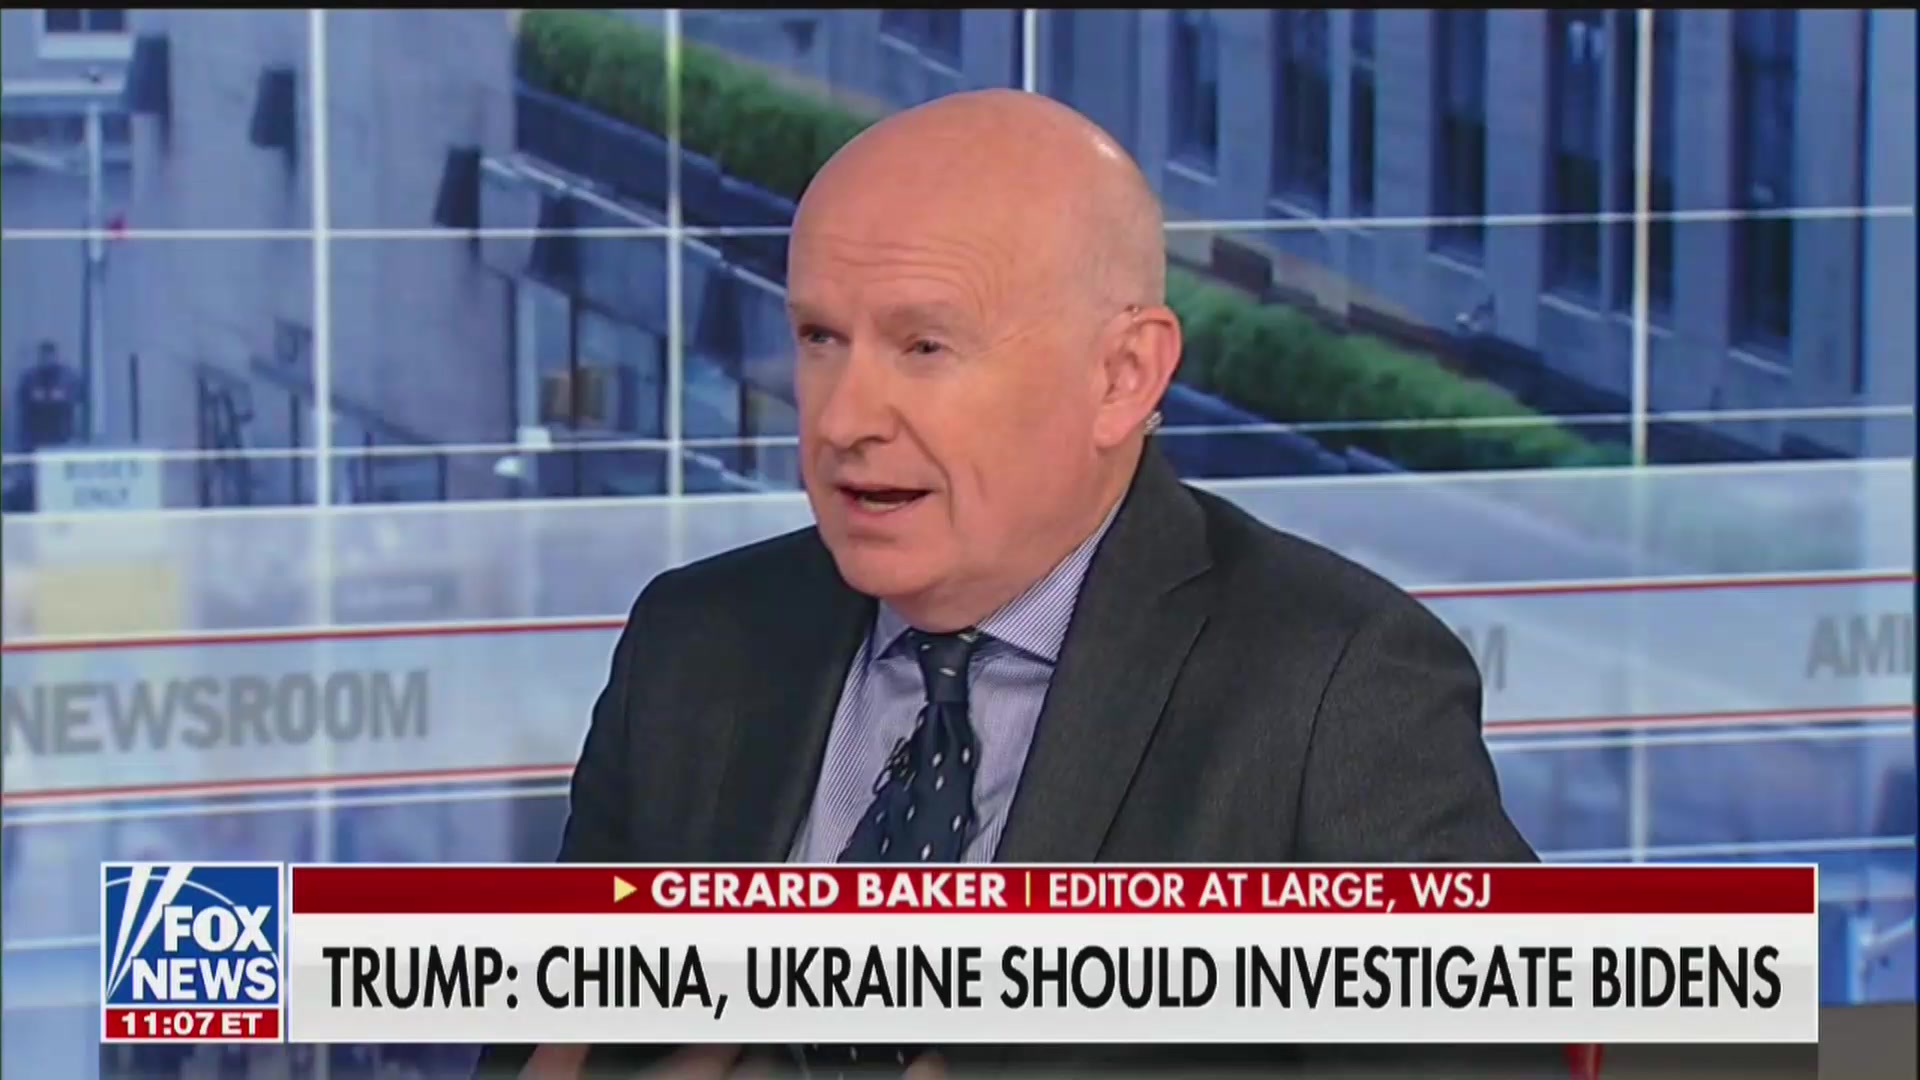 Wall Street Journal Editor Praises Trump’s ‘Legitimate’ Call for China to Dig Up Dirt on Biden